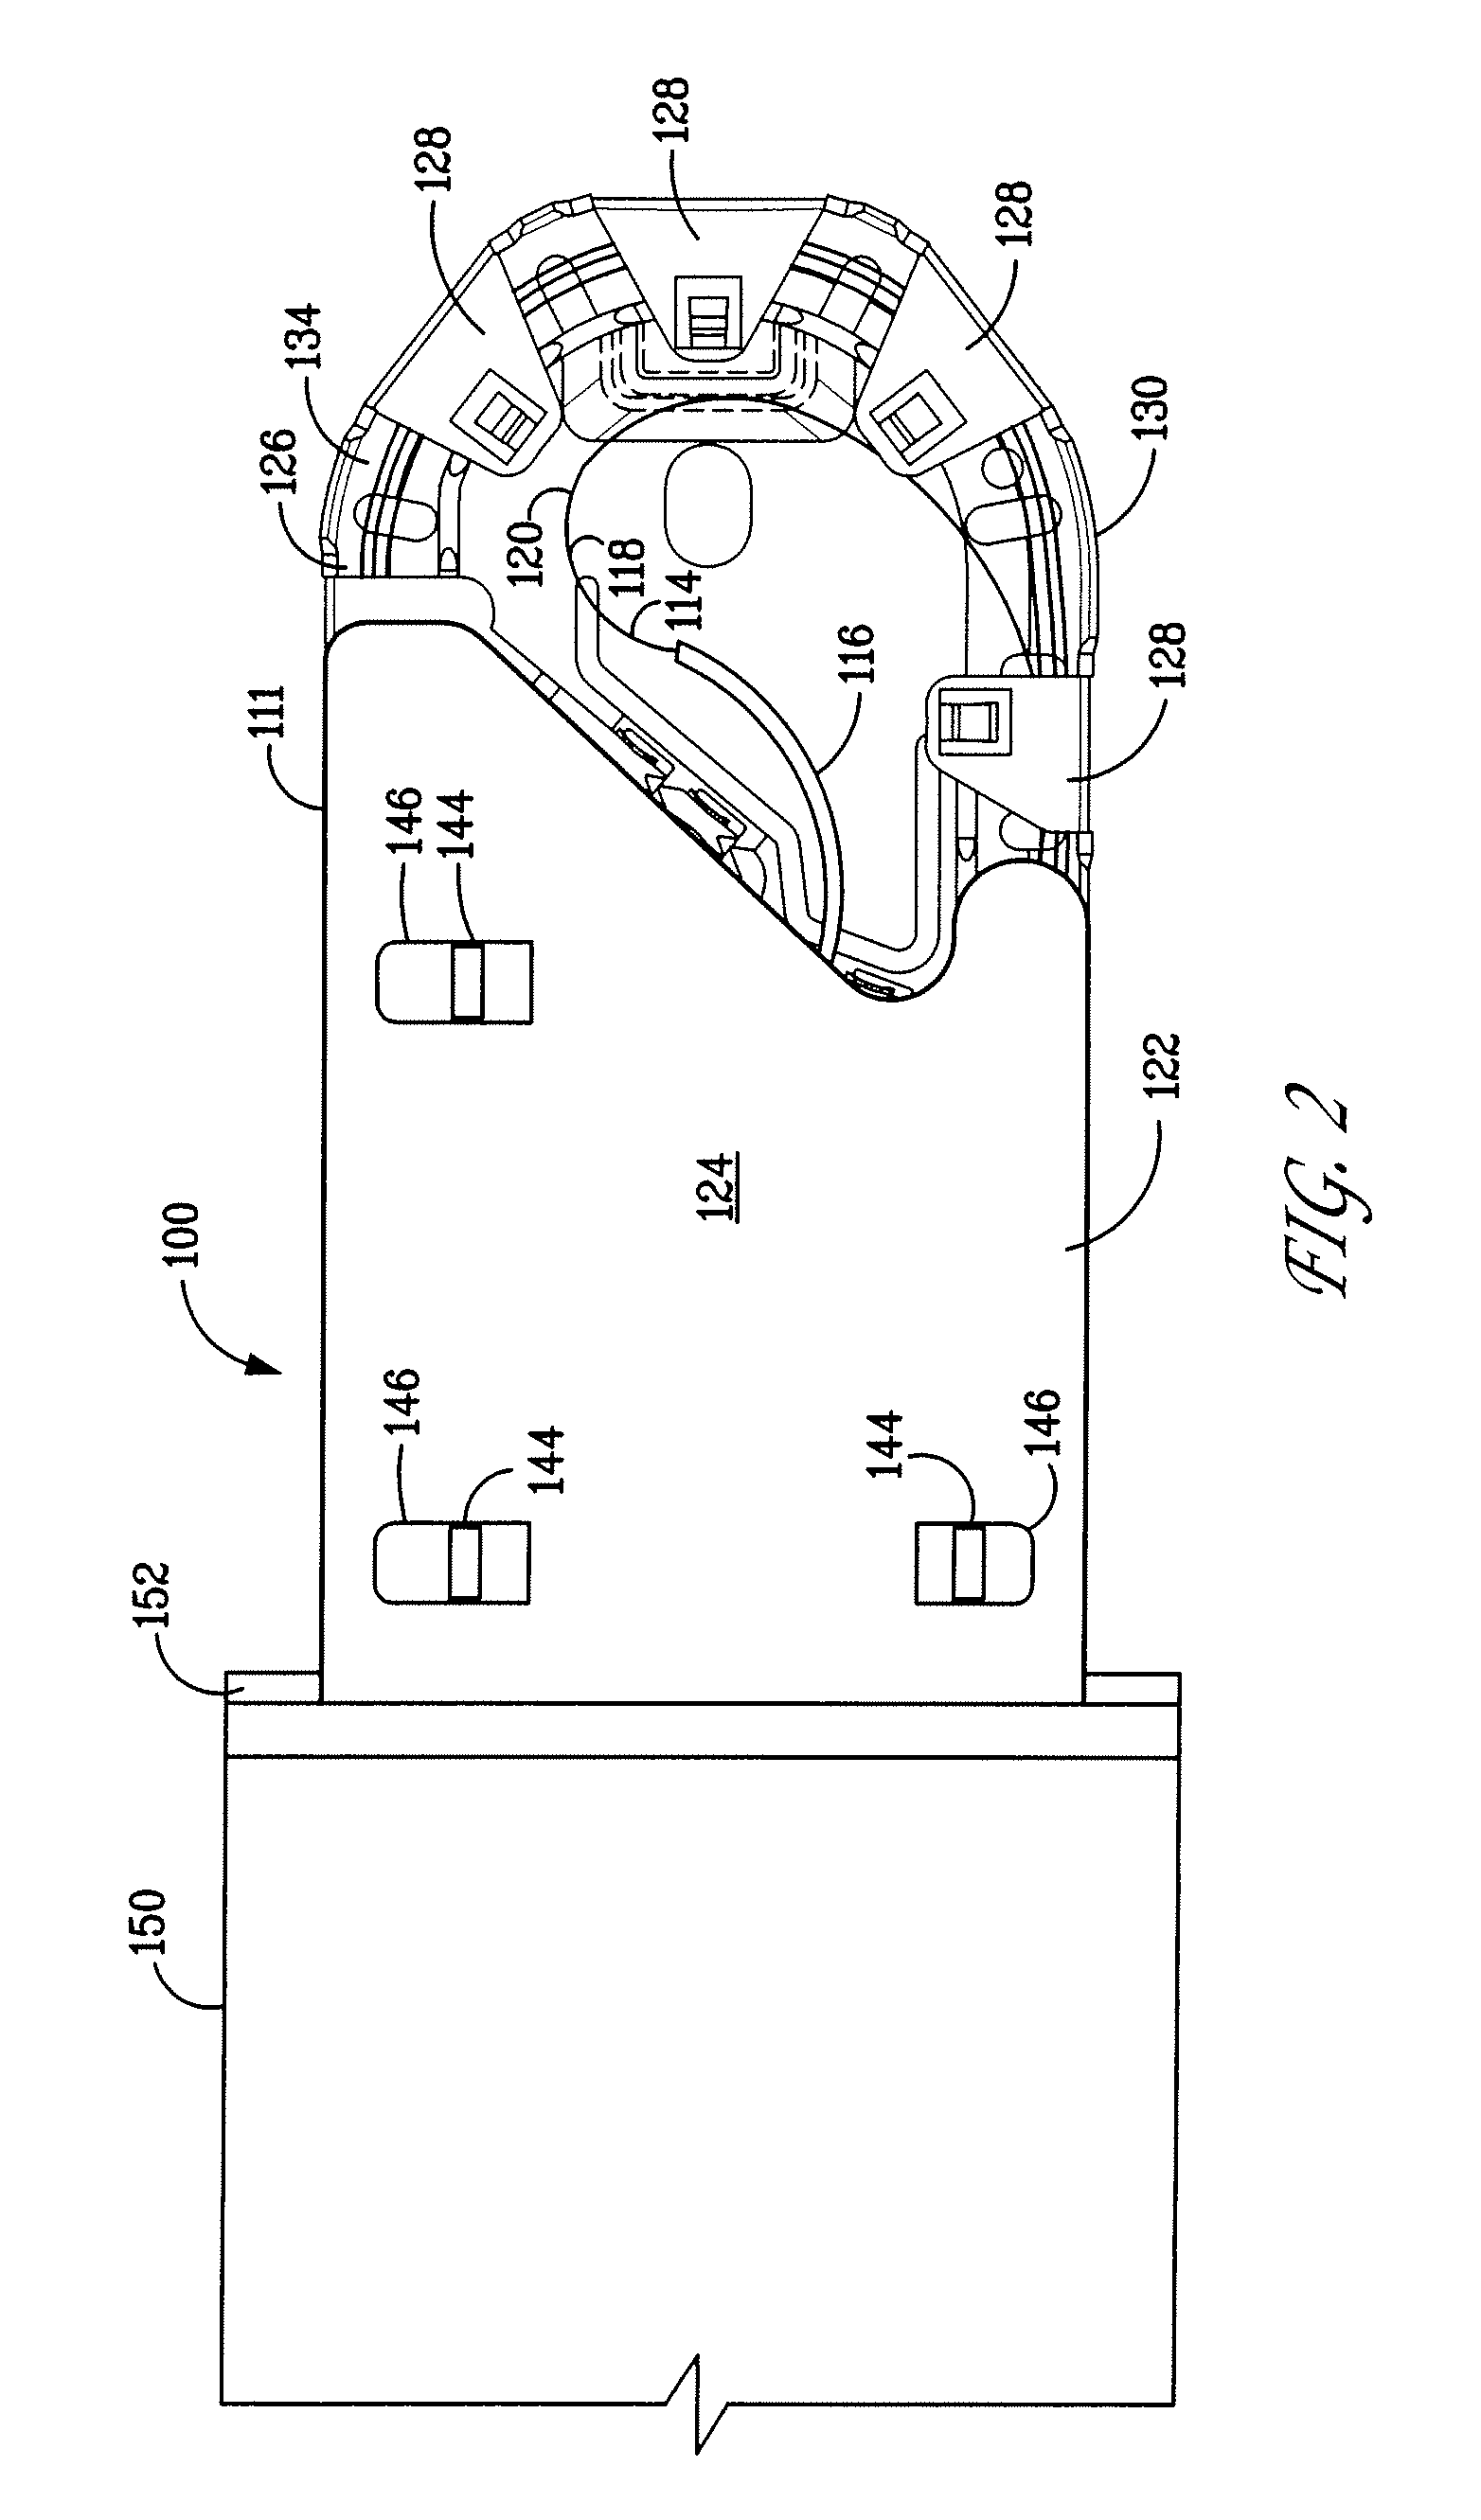 Packaged antimicrobial medical device having improved shelf life and method of preparing same